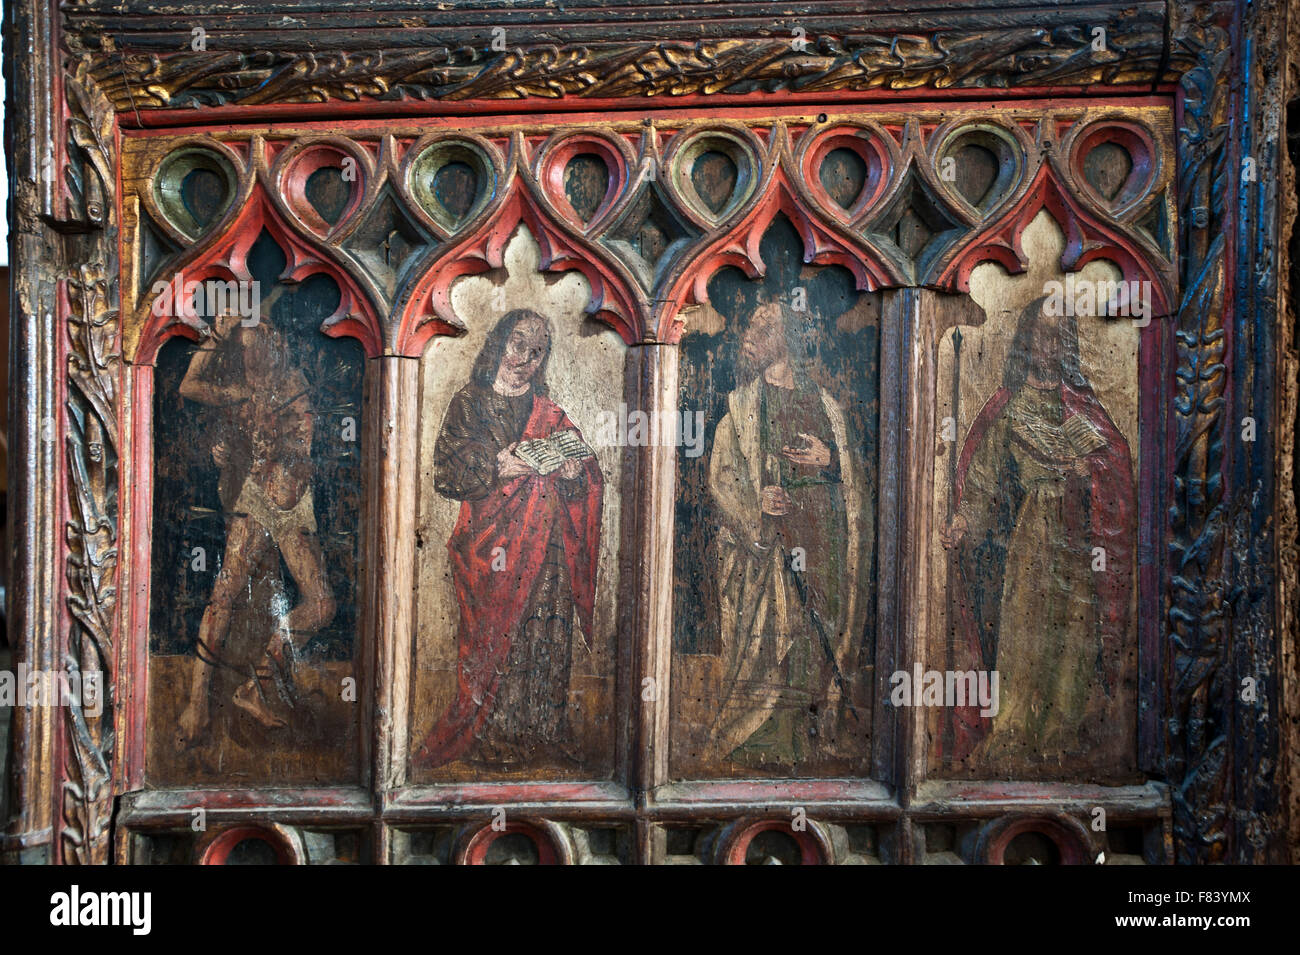 Paintings on wooden rood screen choir stall Church St. Pancras Widecombe-in-the-Moor Dartmoor Devon England UK Europe Stock Photo